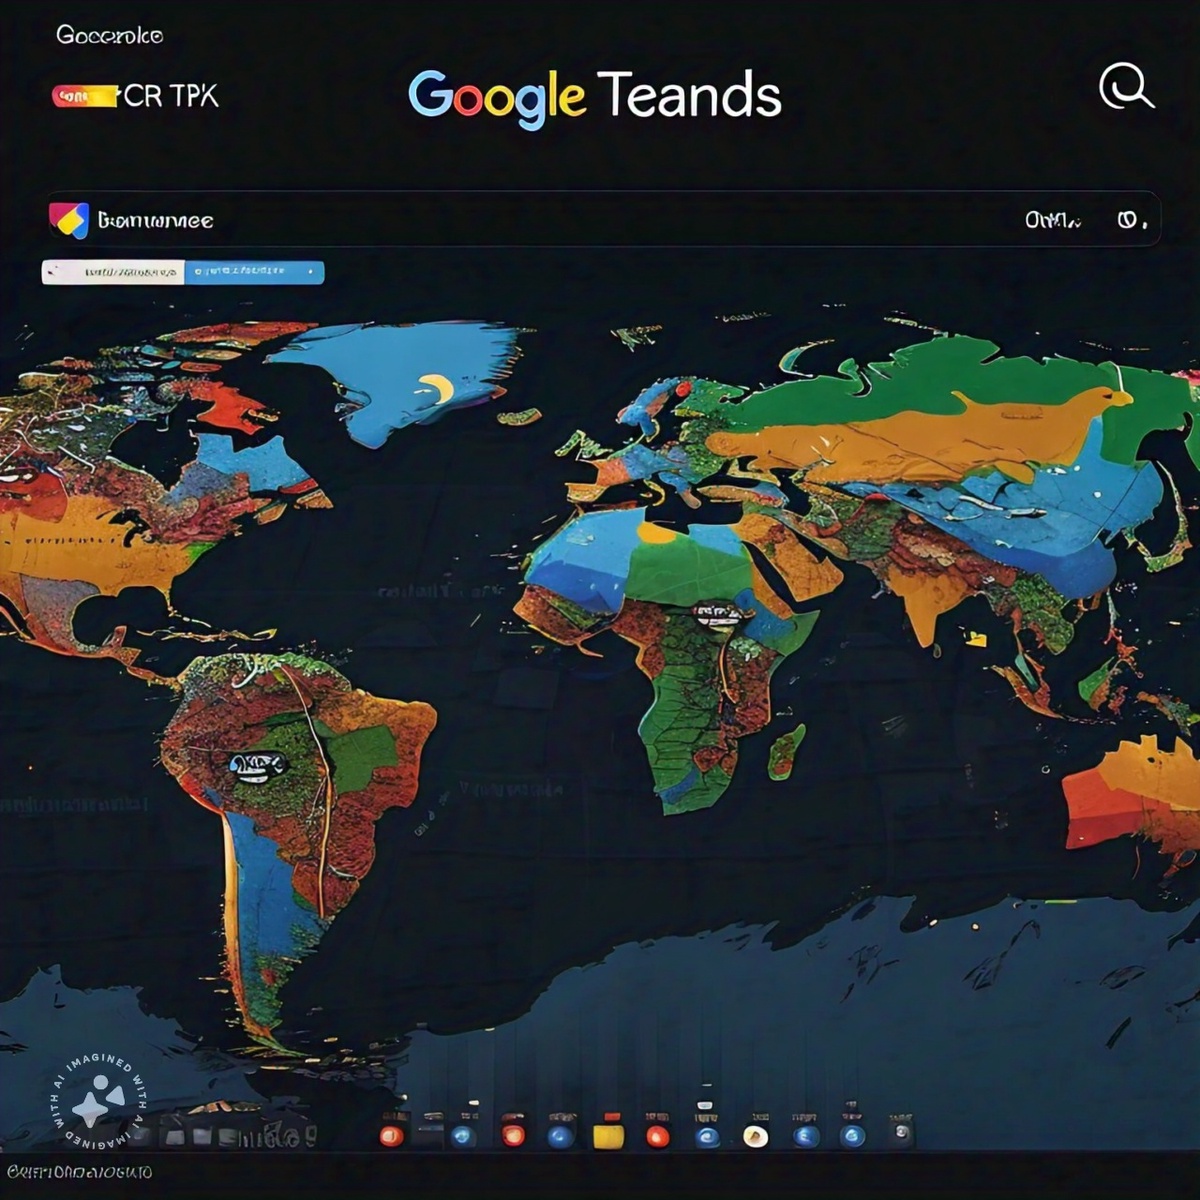 Trends In Google: Harnessing the Power of Trends for Business Success